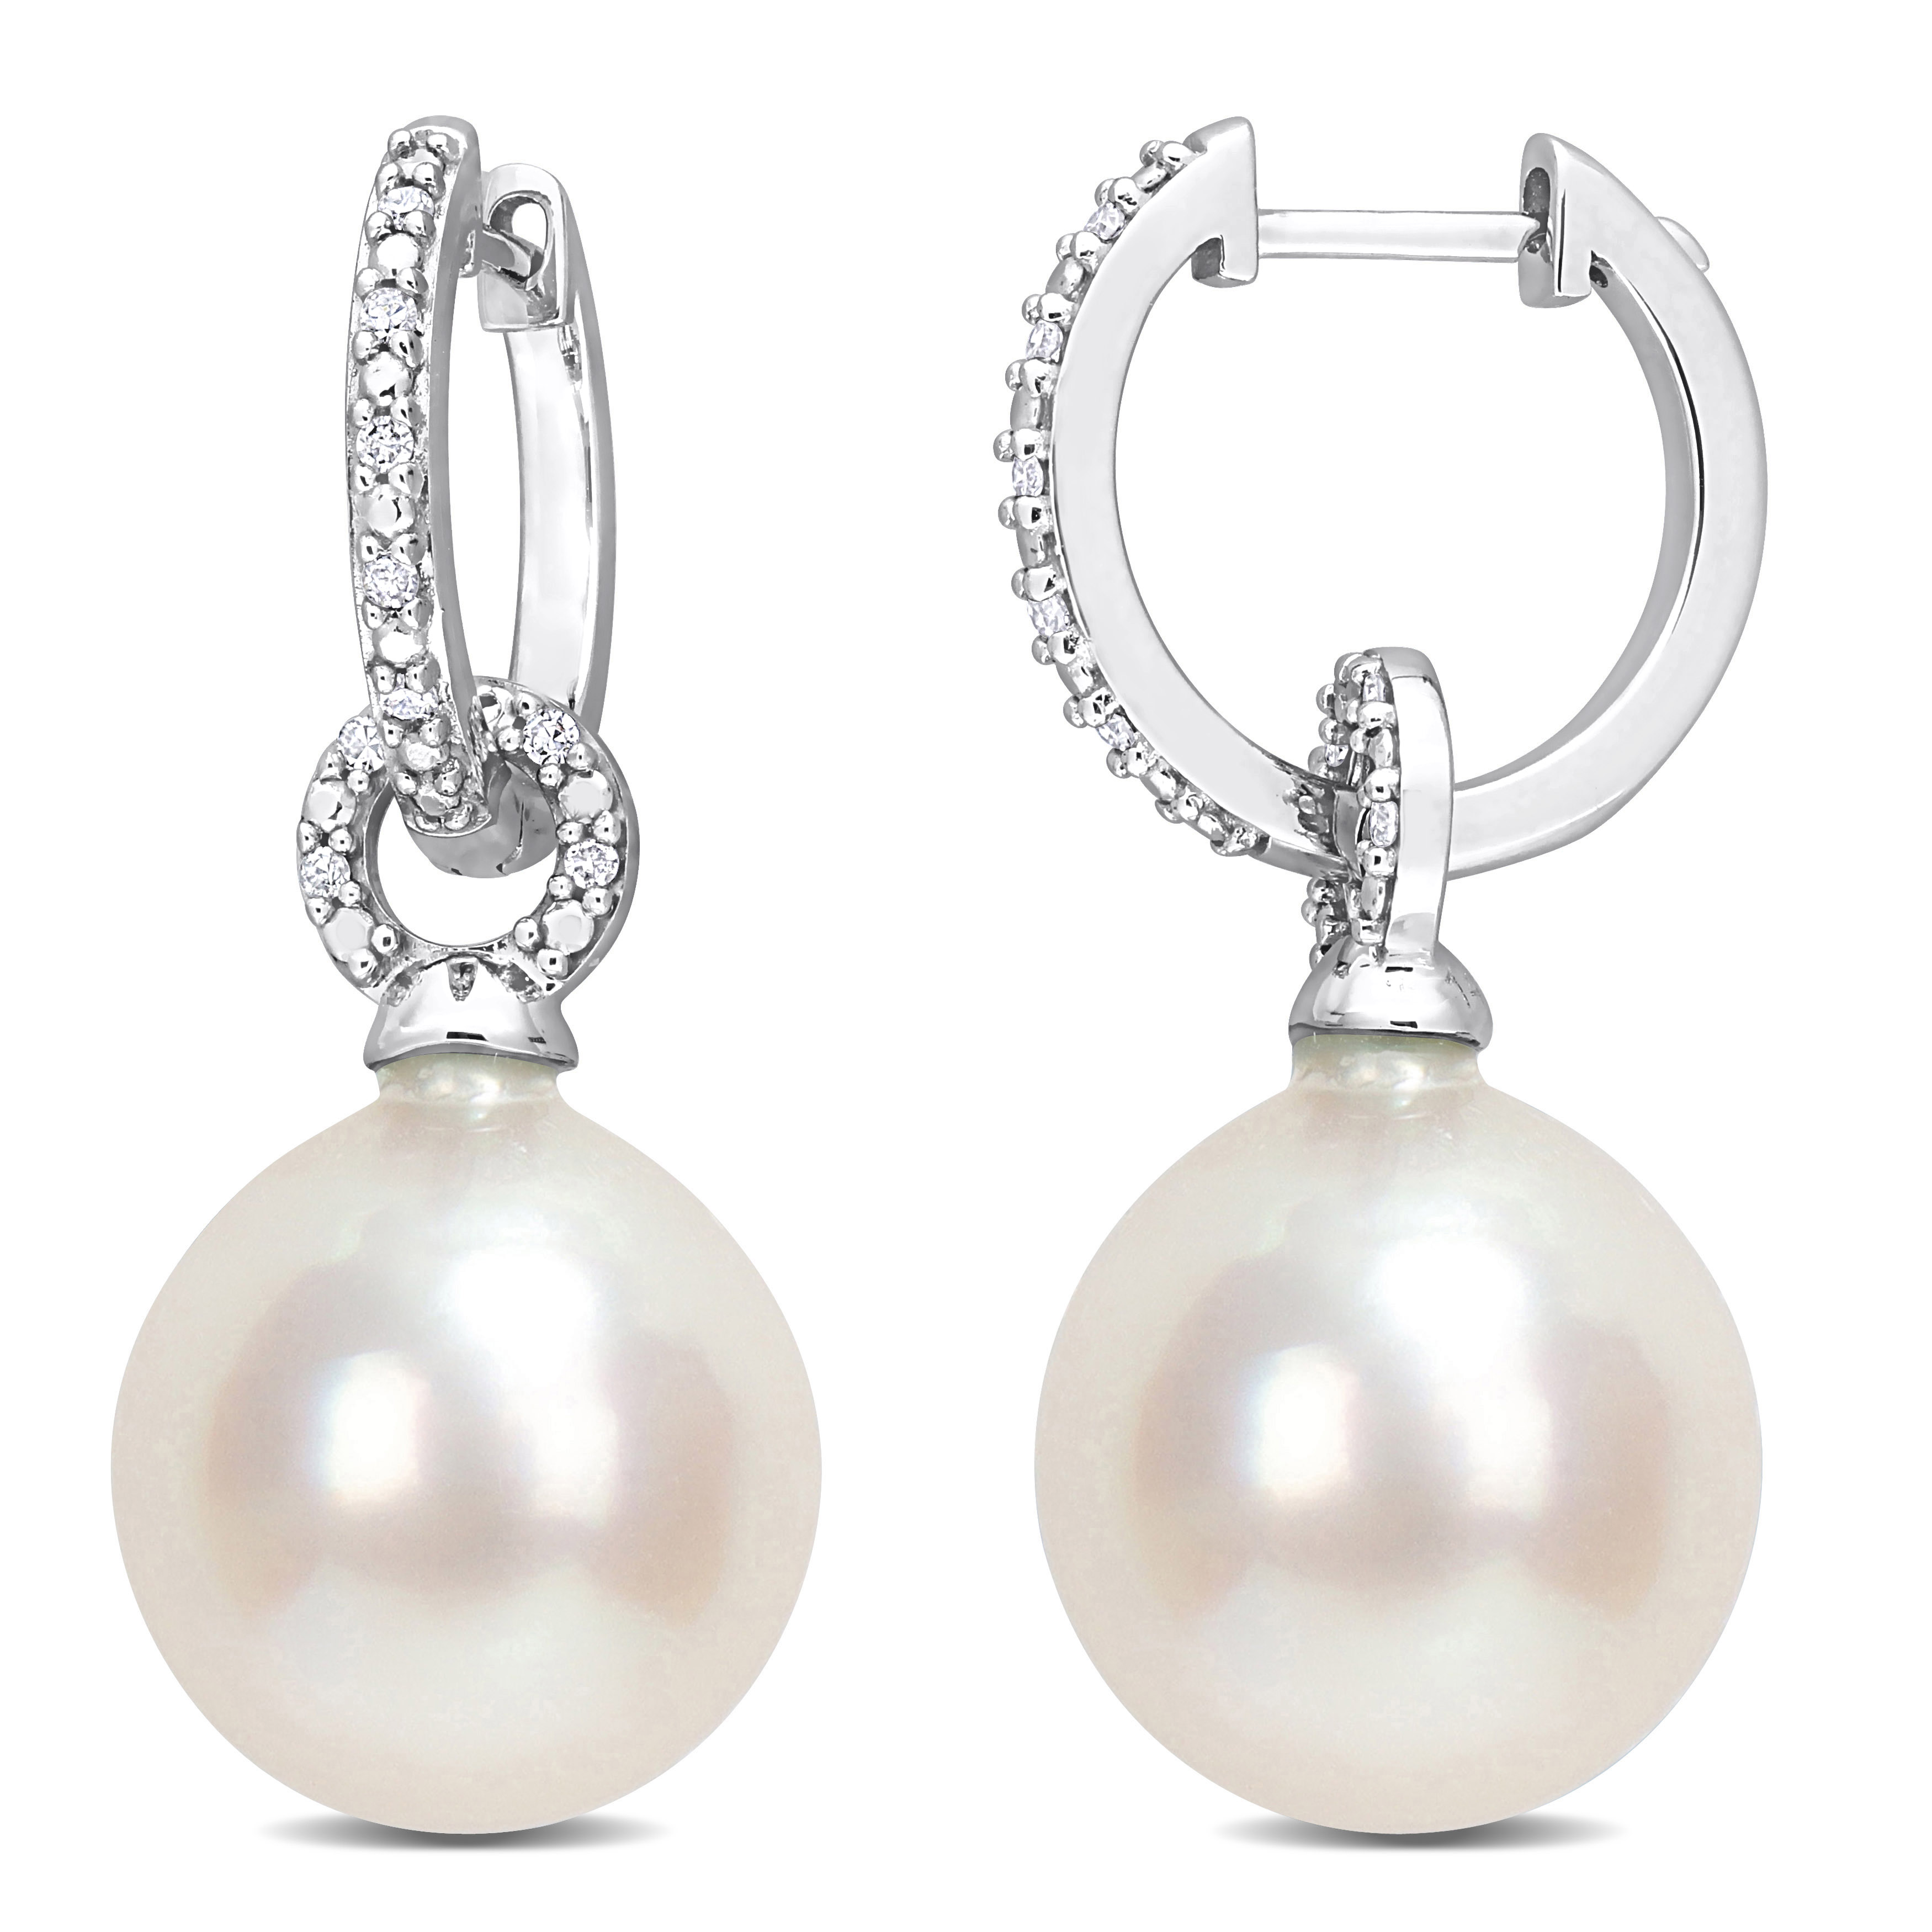 11-11.5 MM South Sea Cultured Pearl and 1/10 CT TW Diamond Huggie Earrings in 14k White Gold